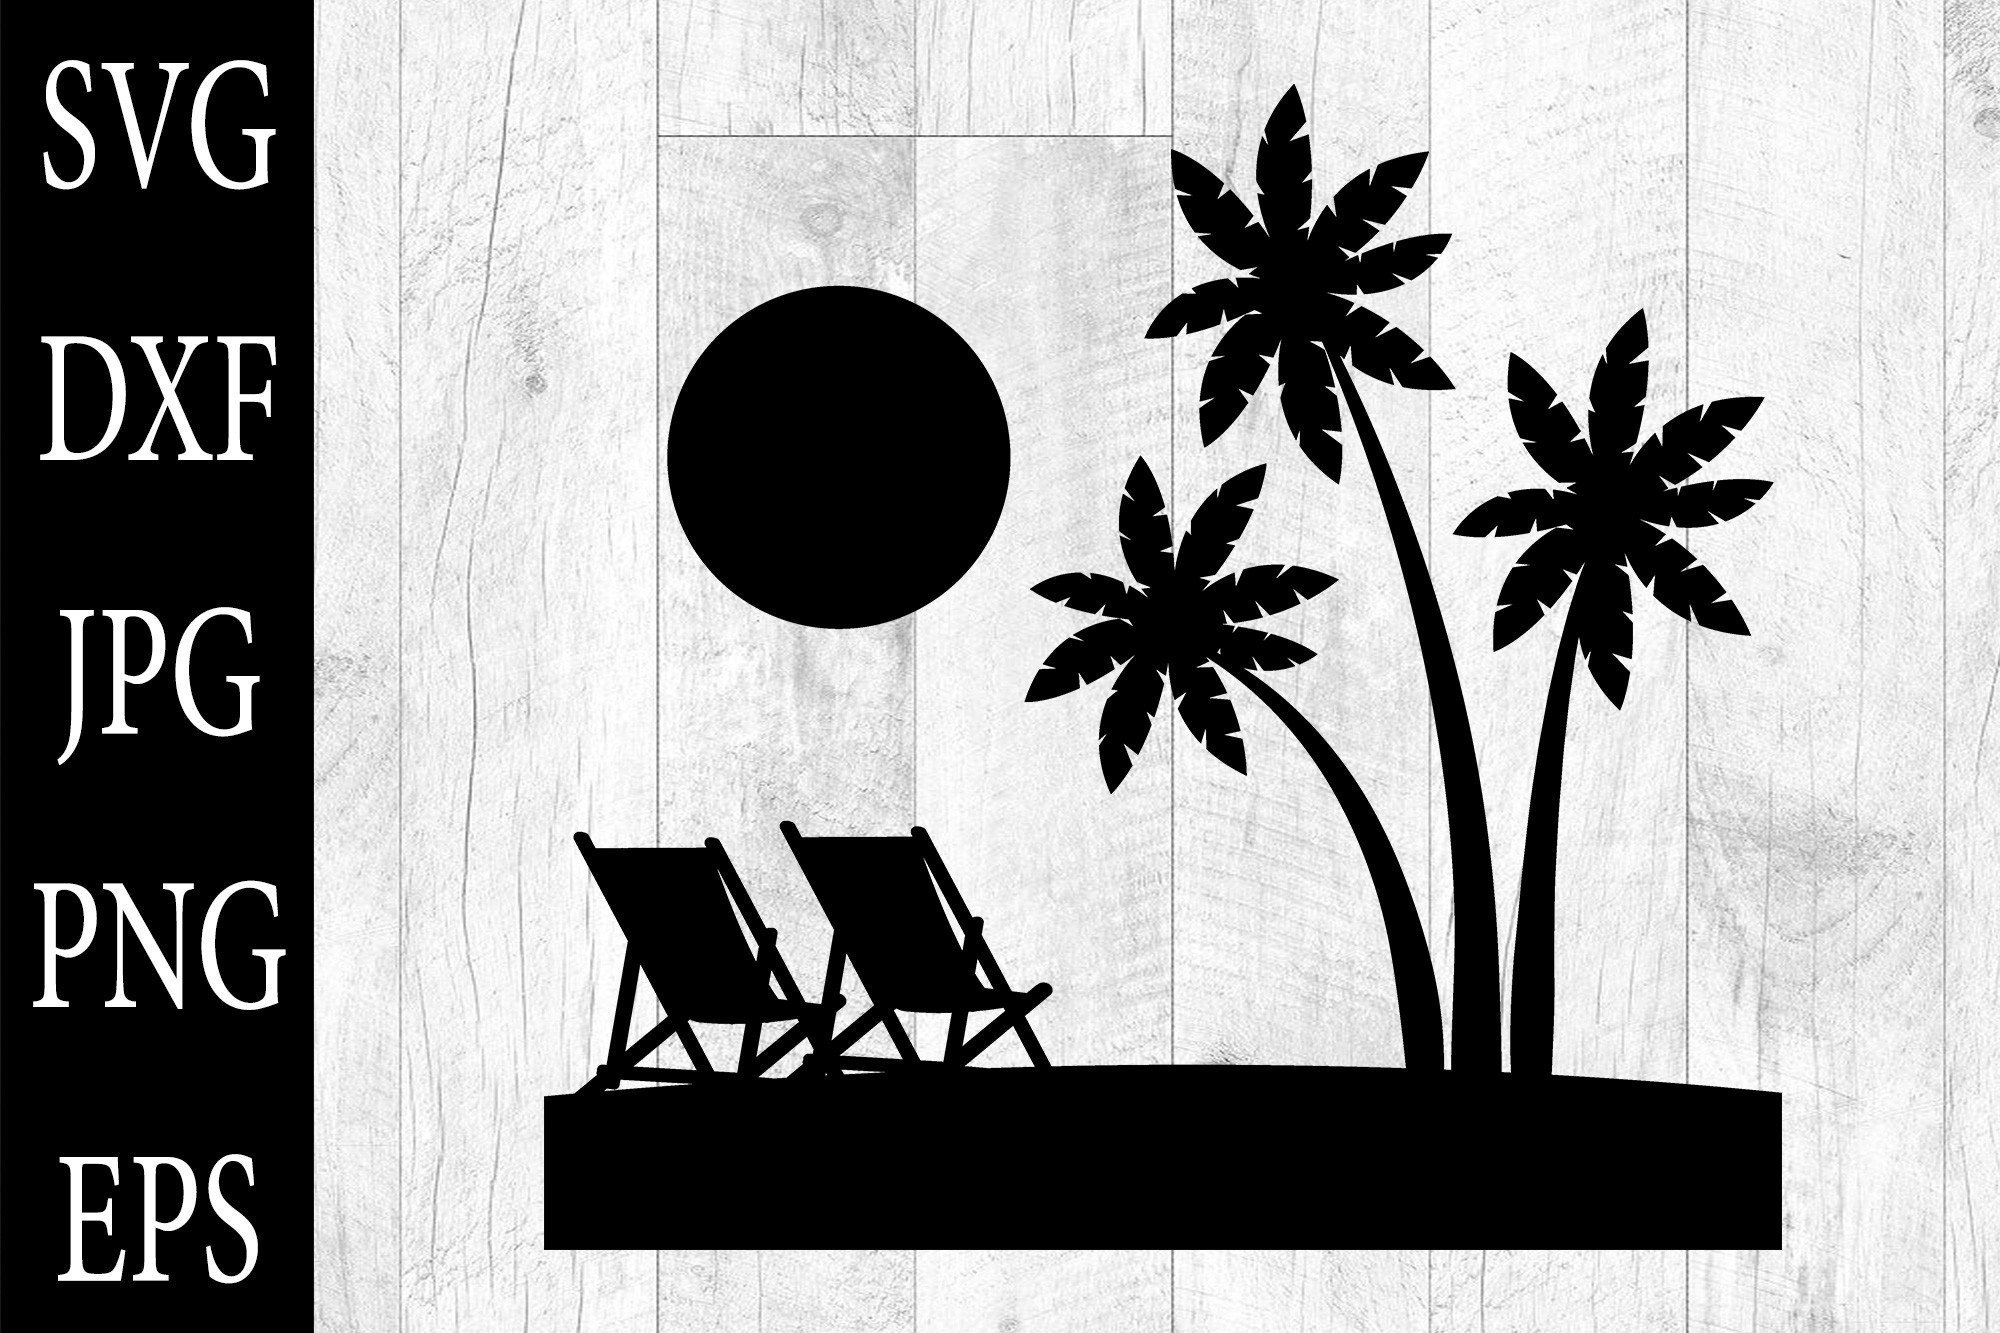 Beach with Coconut Trees Silhouettes SVG Graphic by Aleksa Popovic ...